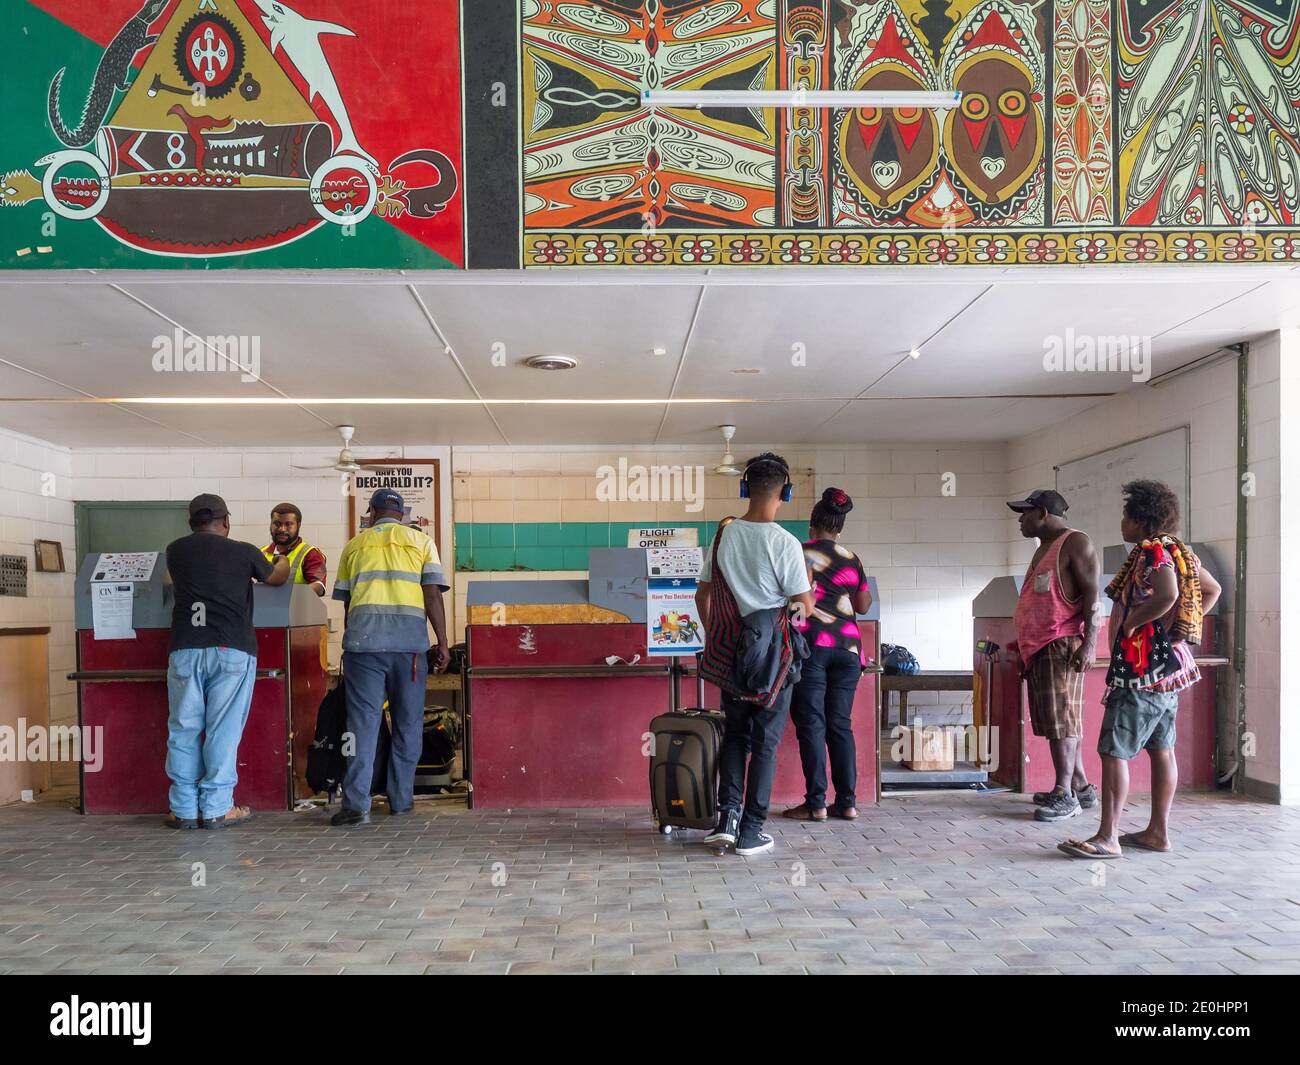 The check-in counter of Wewak airport, also called Boram Airport, in Wewak, the capital of the East Sepik province of Papua New Guinea. Stock Photo